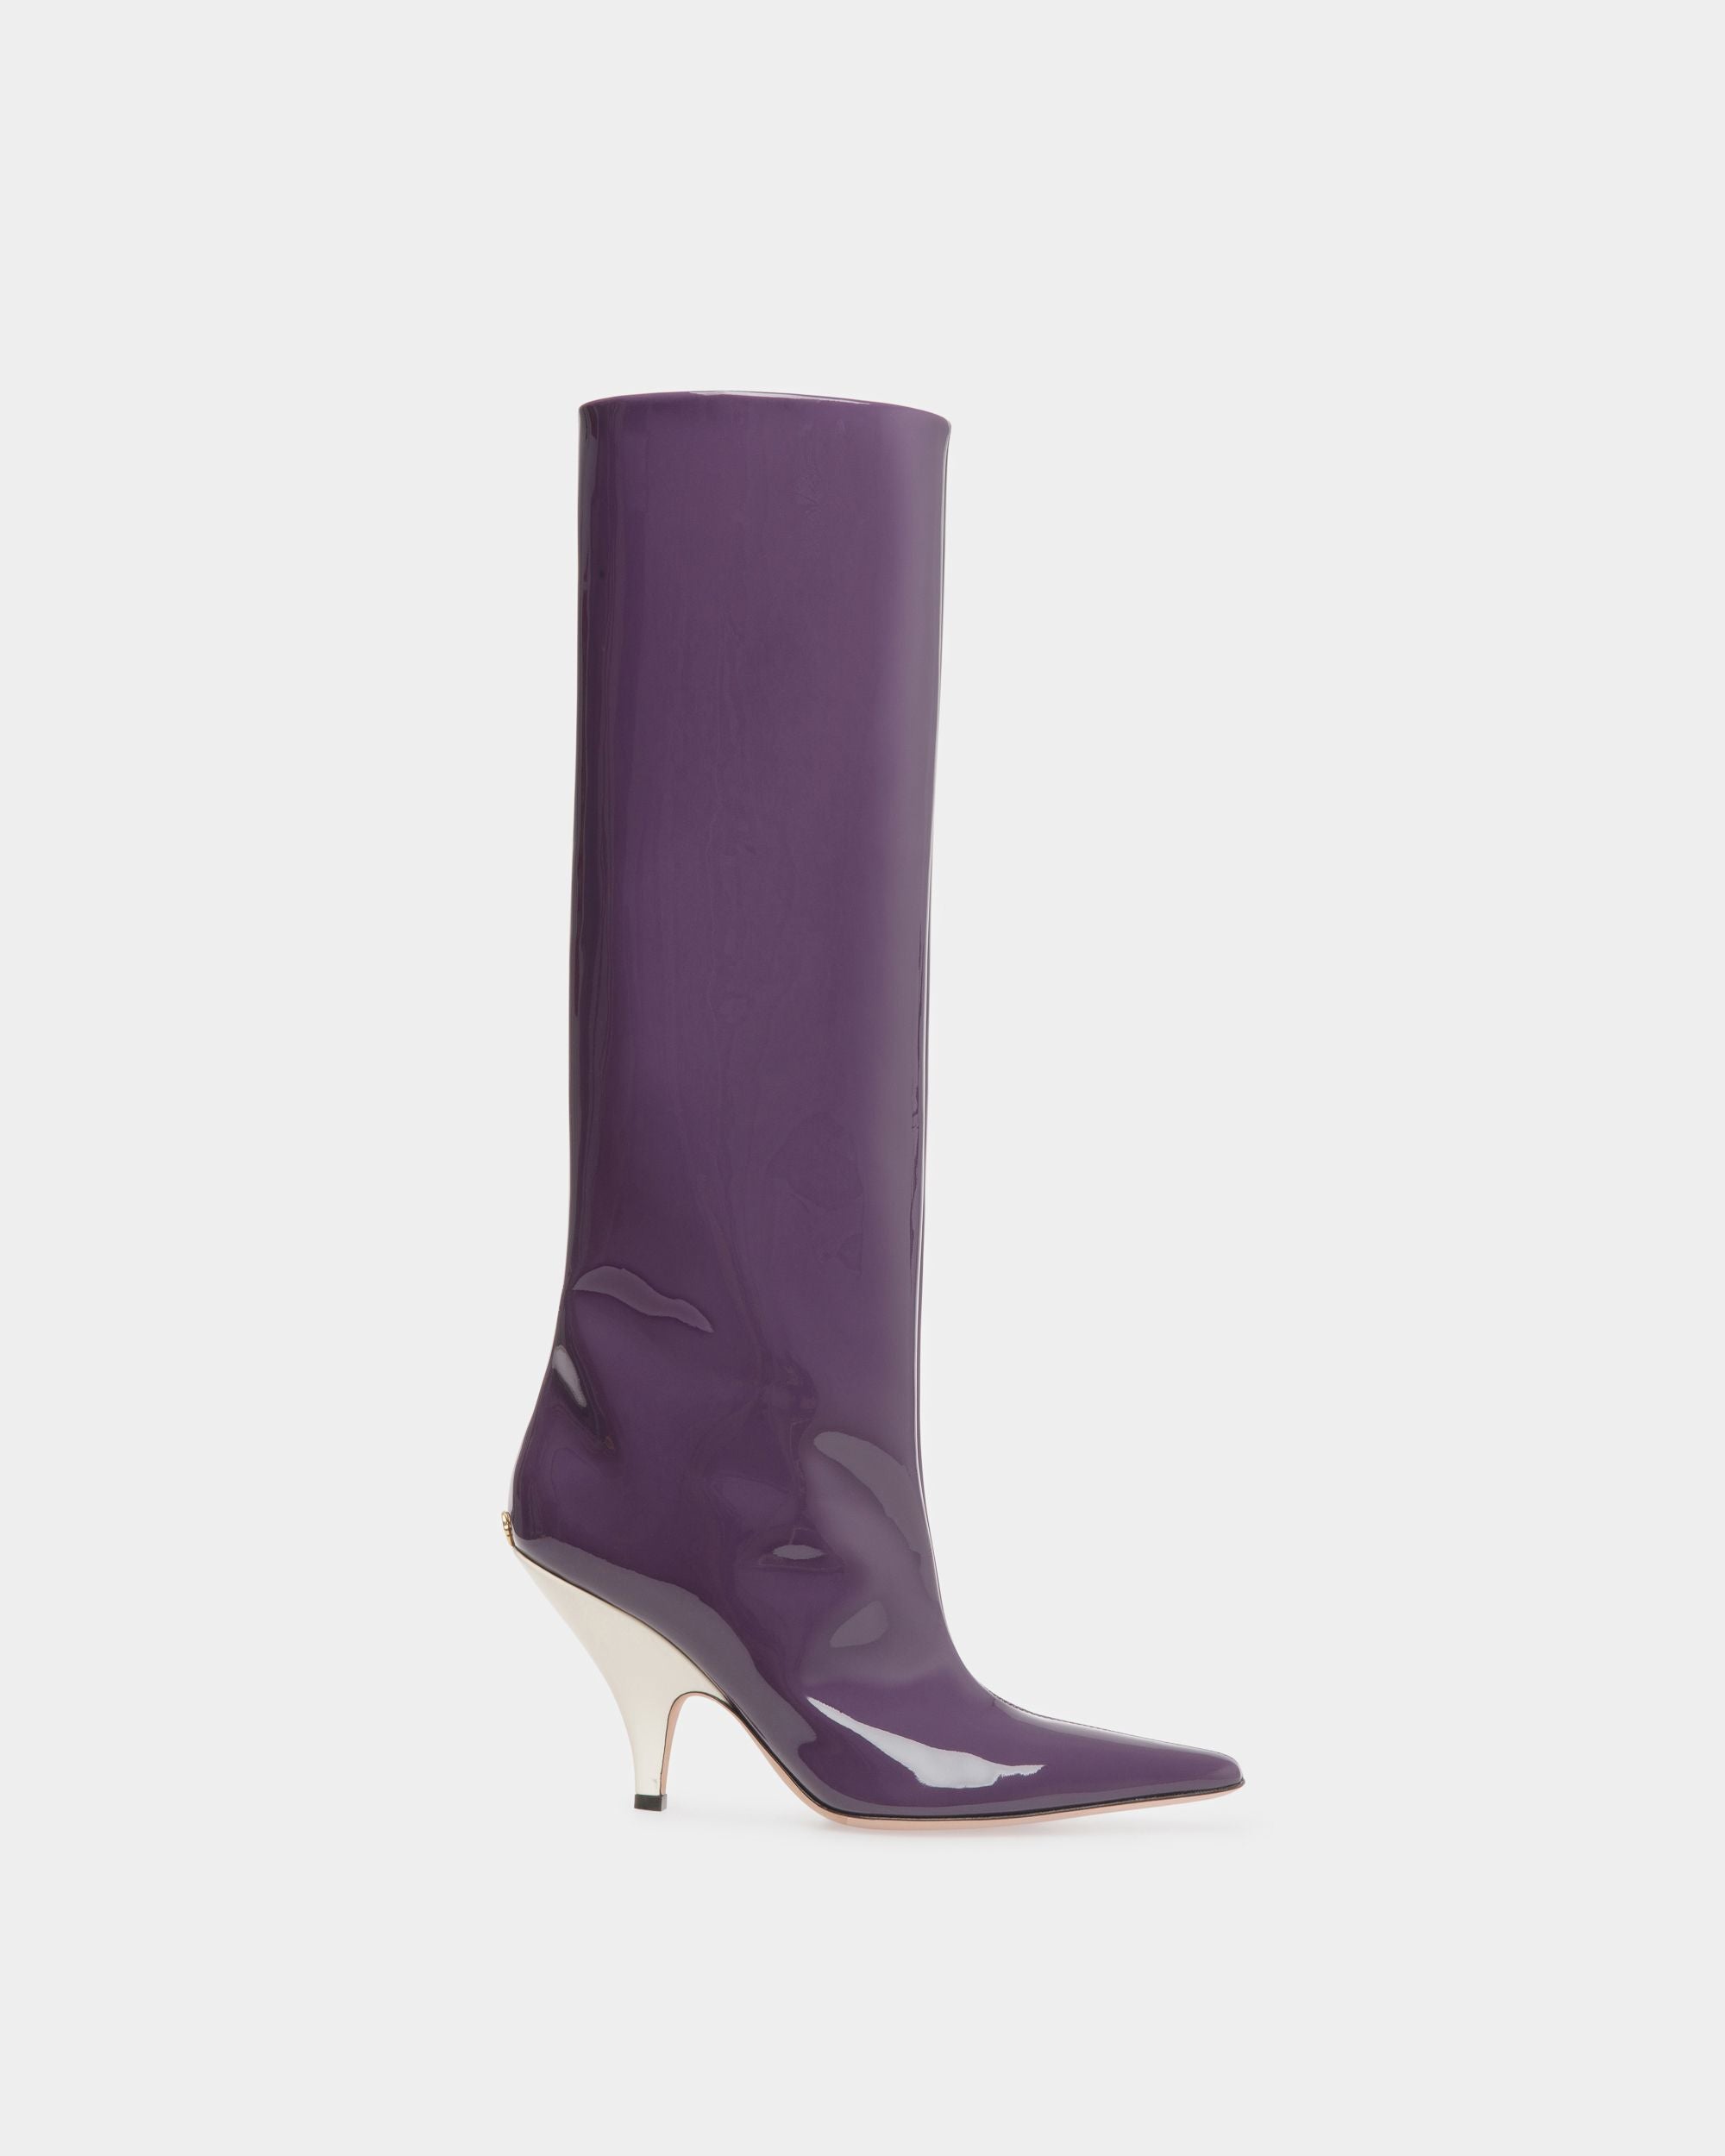 Kika | Women's Boots | Orchid Leather | Bally | Still Life Side